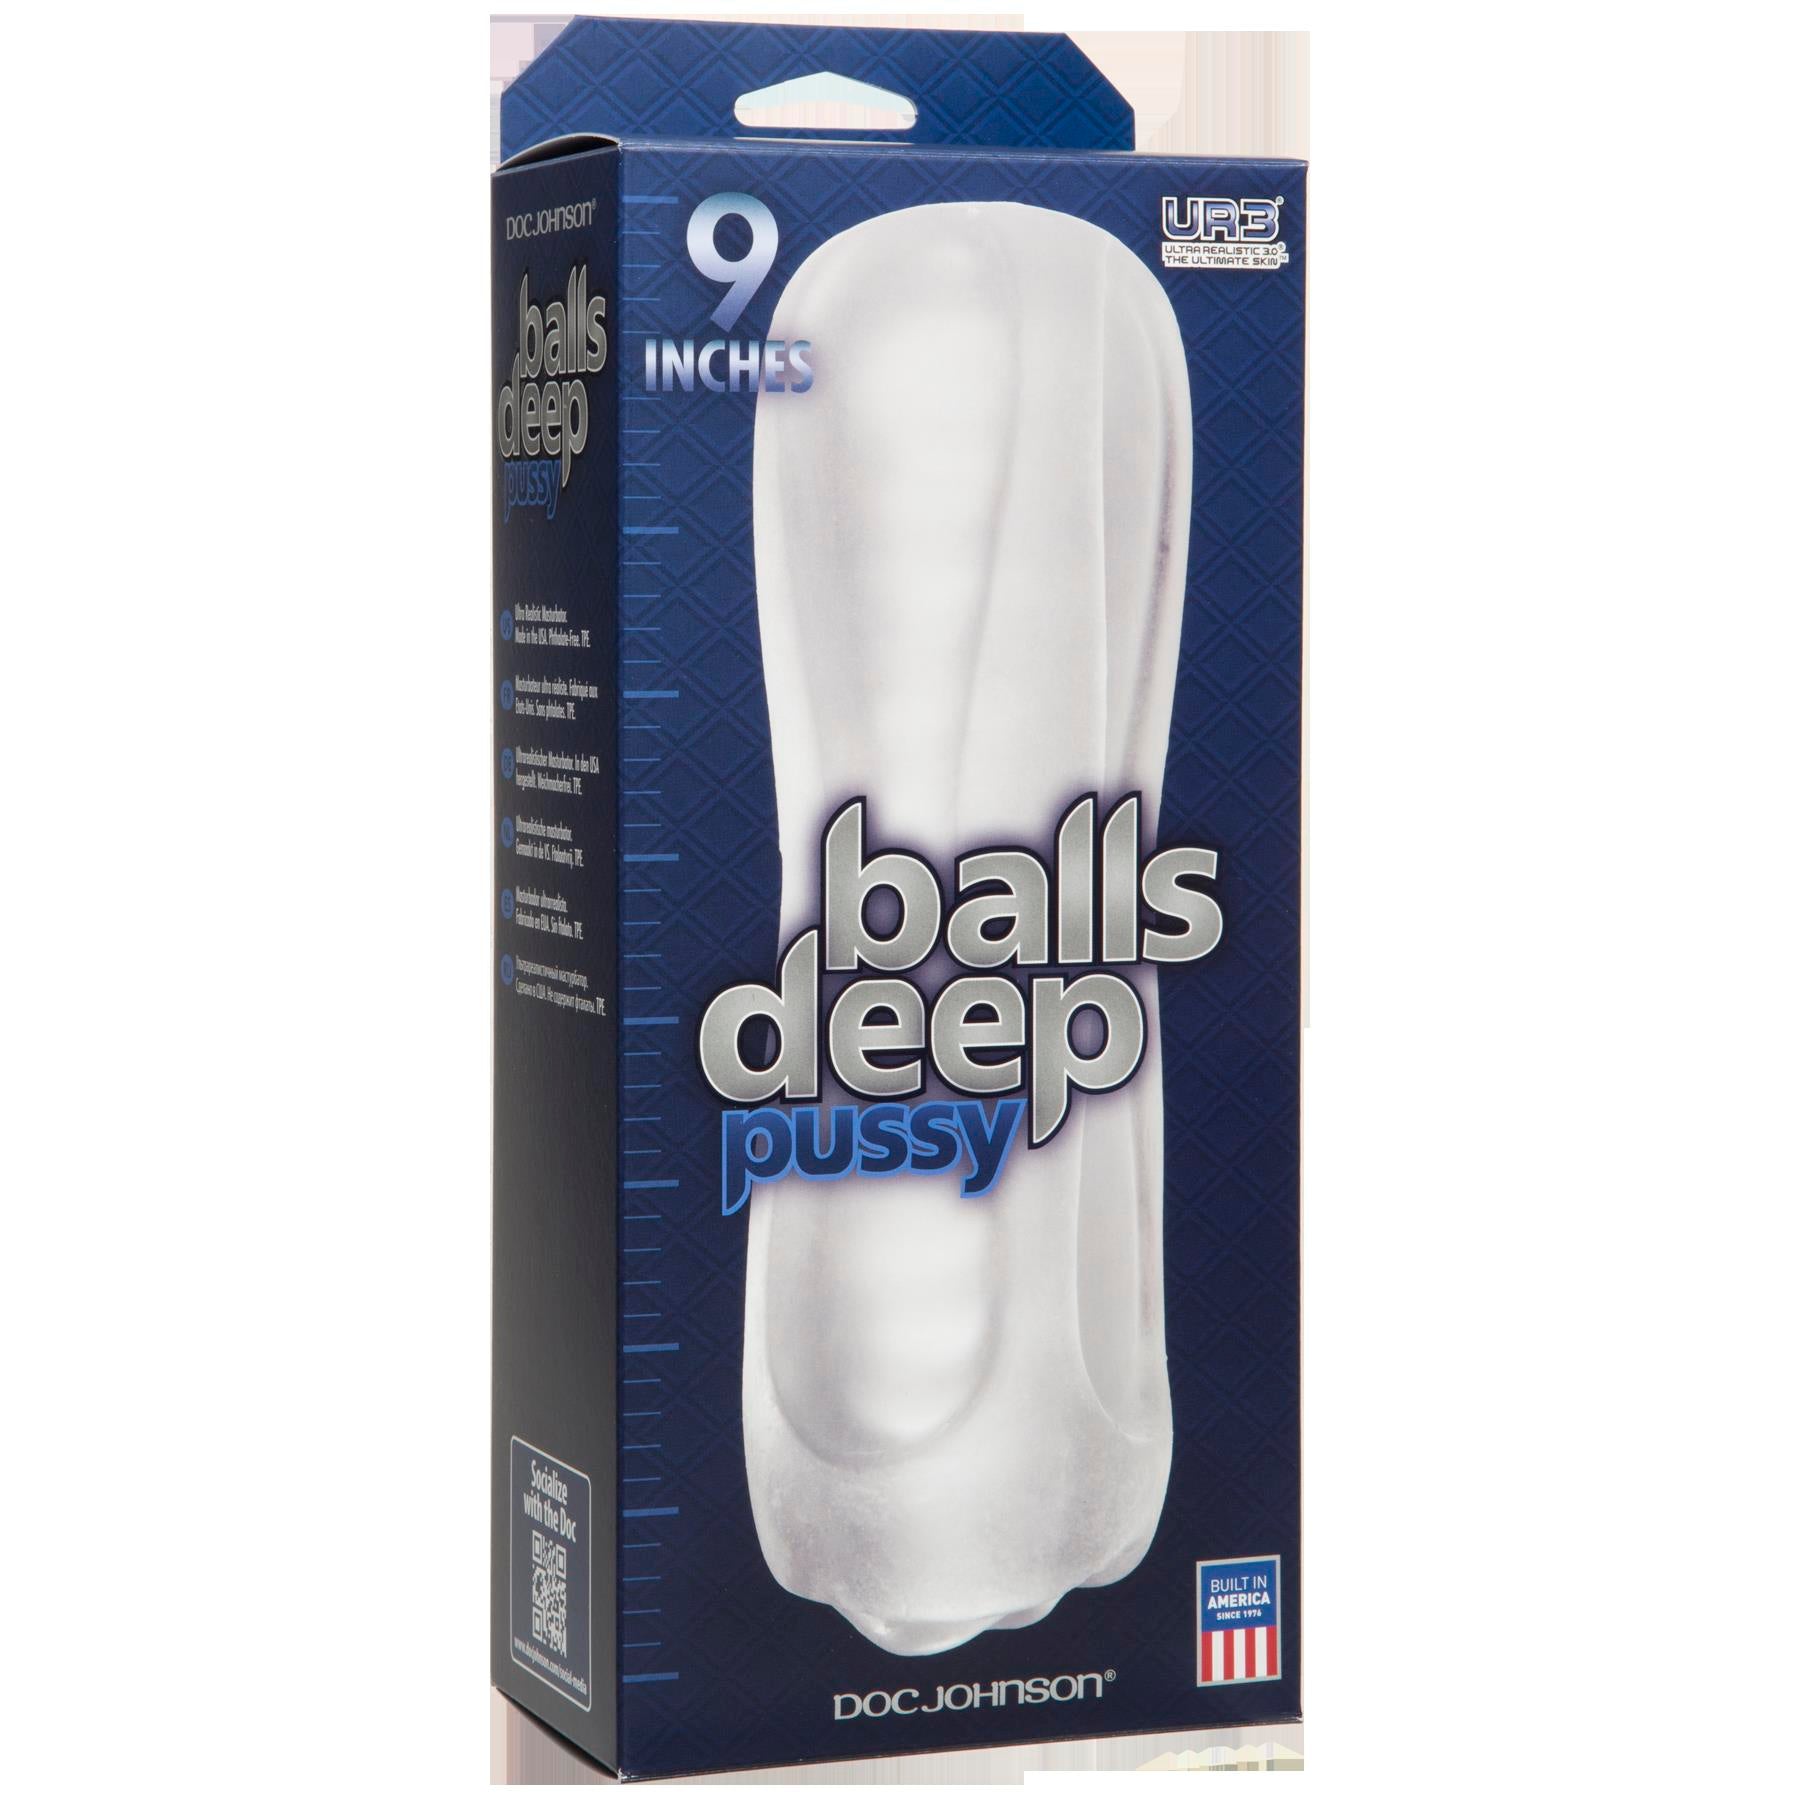 Balls Deep Pussy 9 Inches